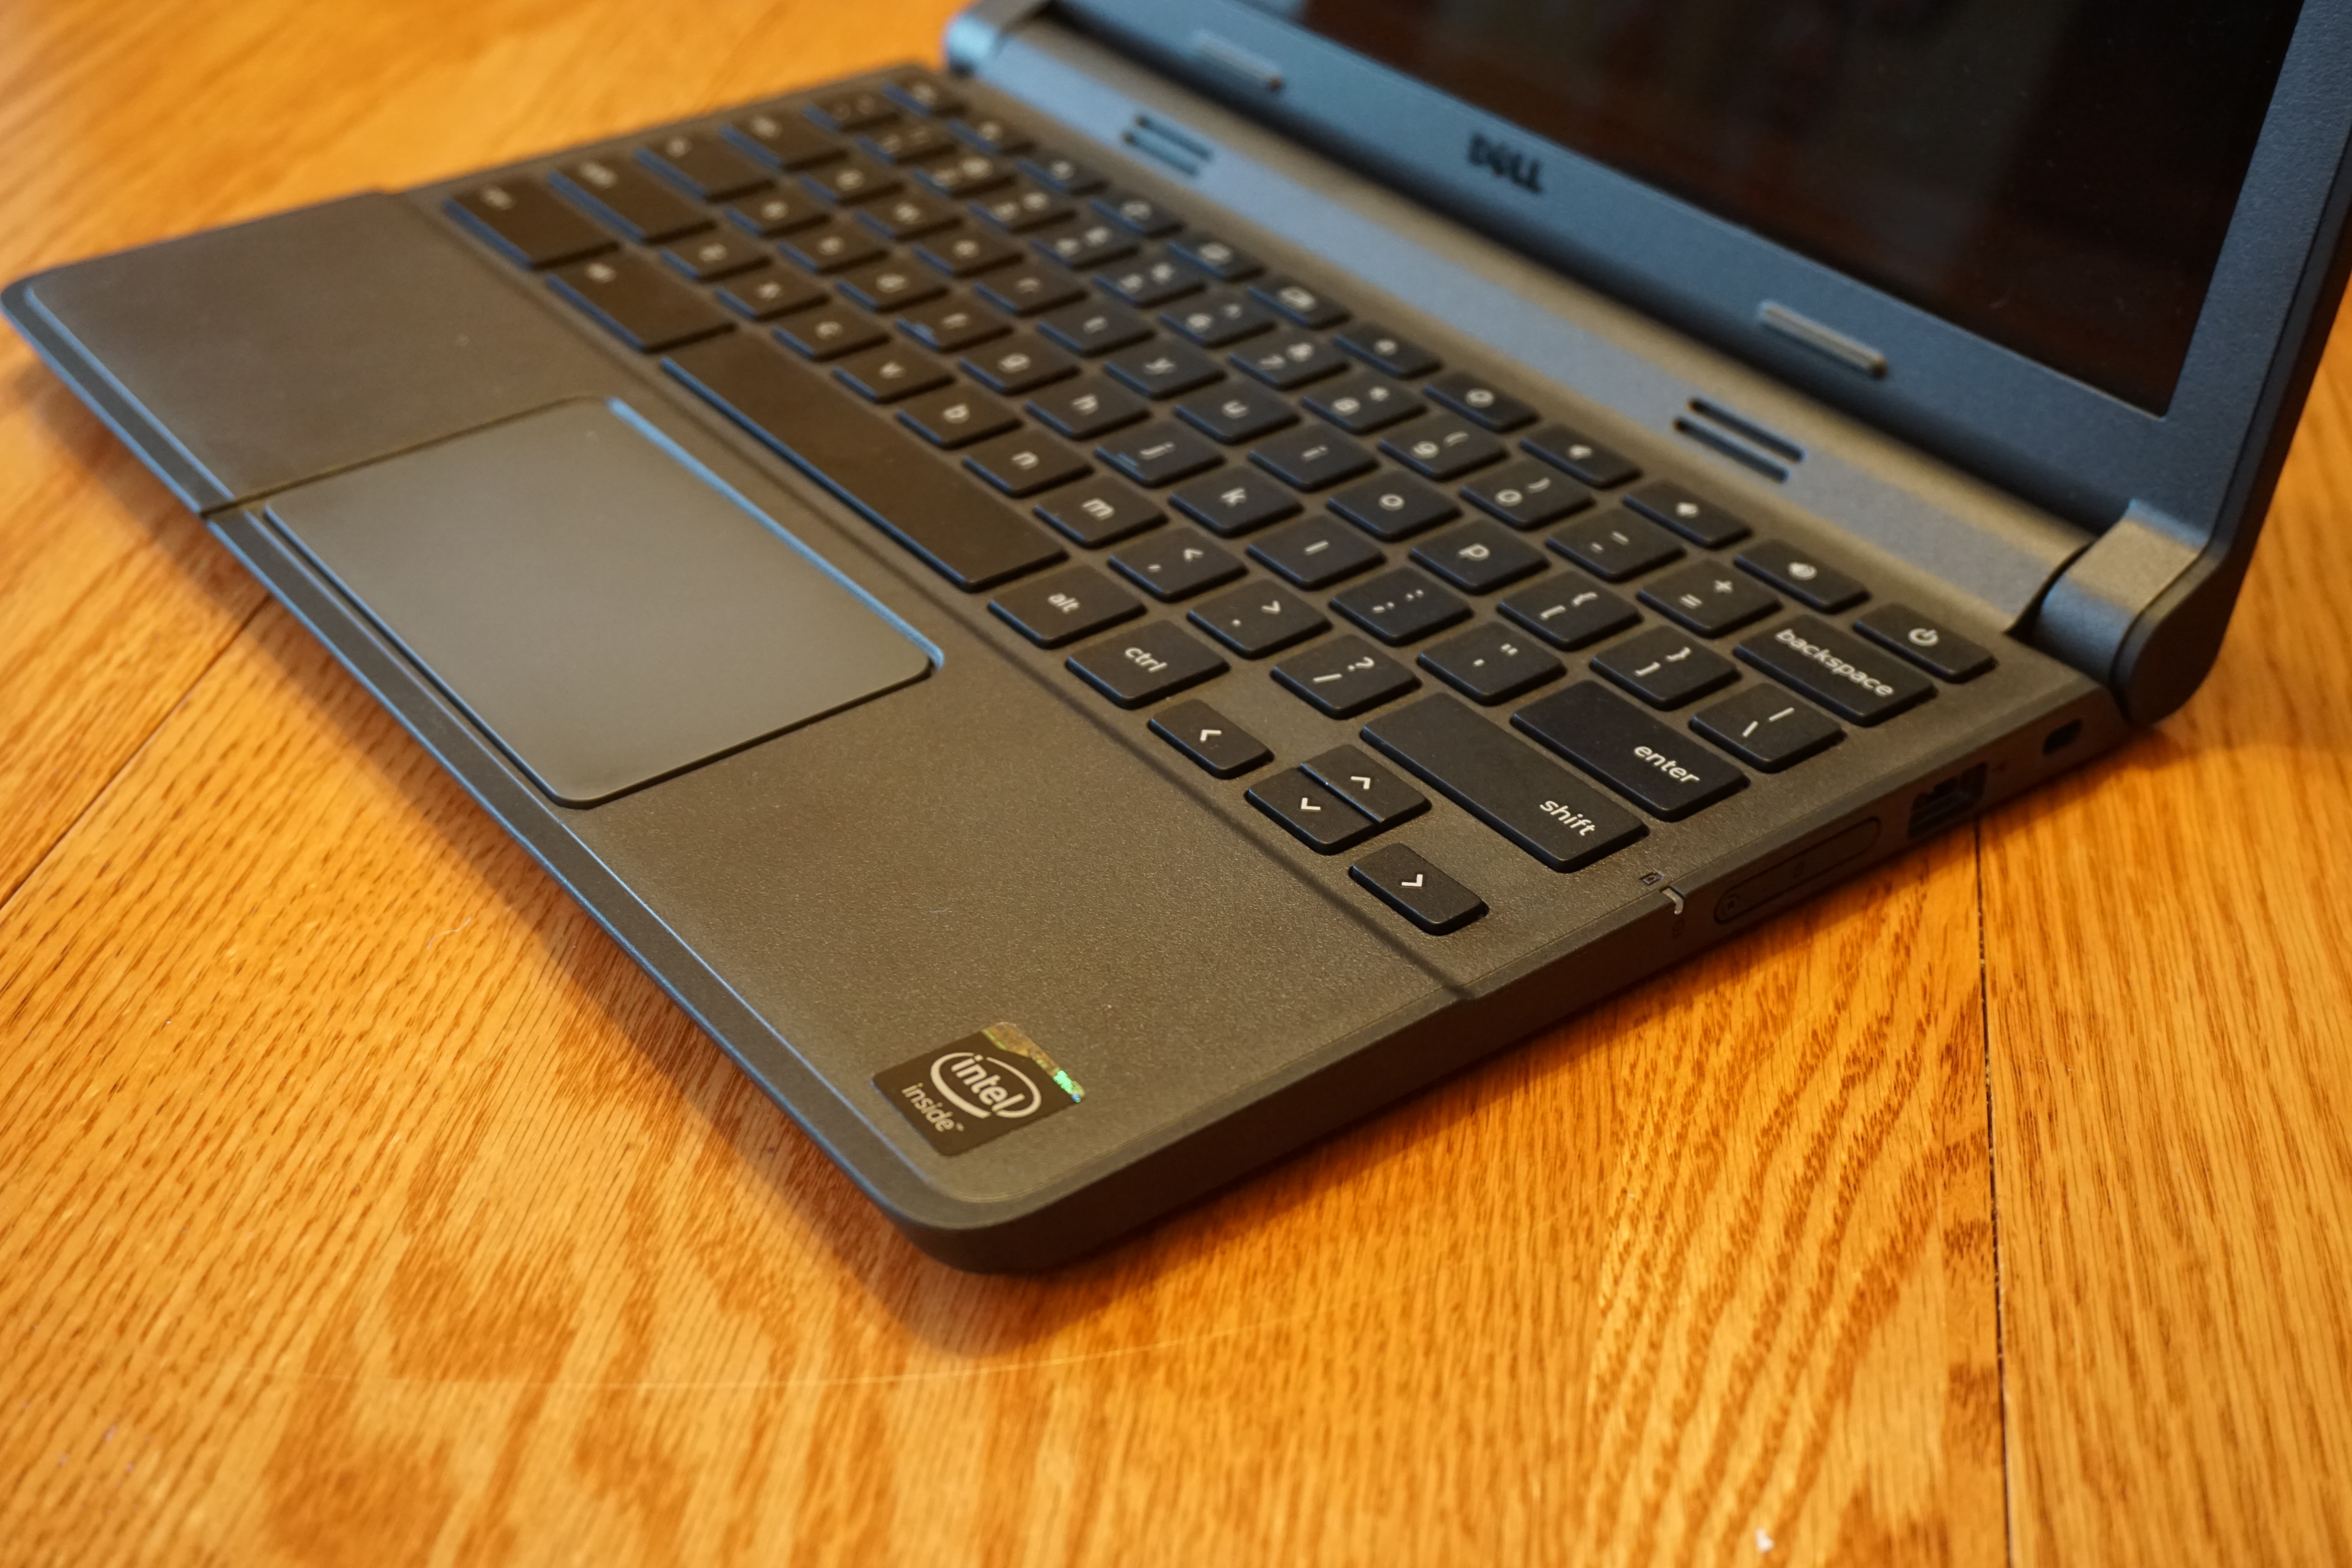 Final Words The Dell Chromebook 11 Touch Review